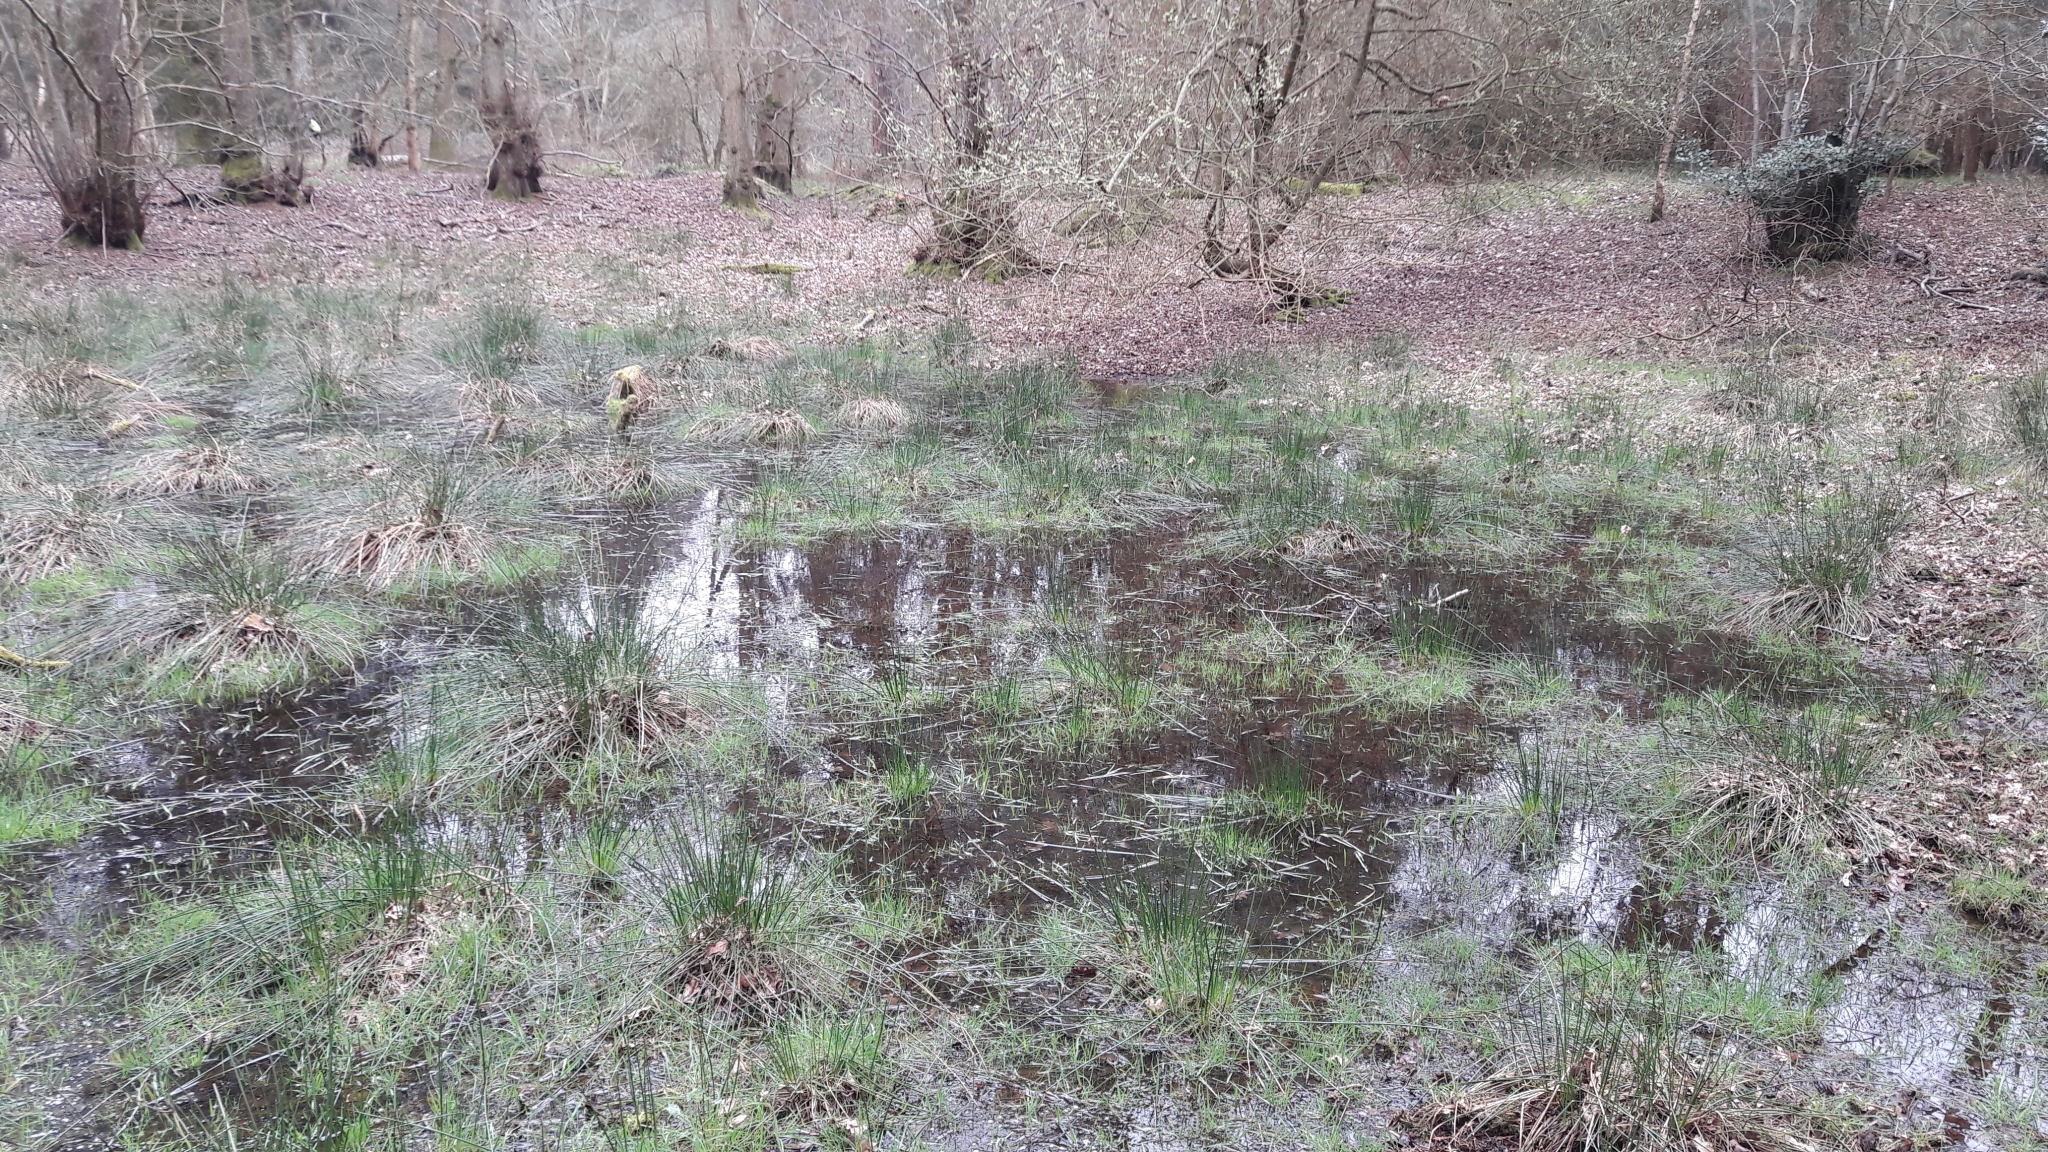 A photo from the FoTF Conservation Event - April 2018 - Improving habitat at High Lodge : A pond amongst the trees